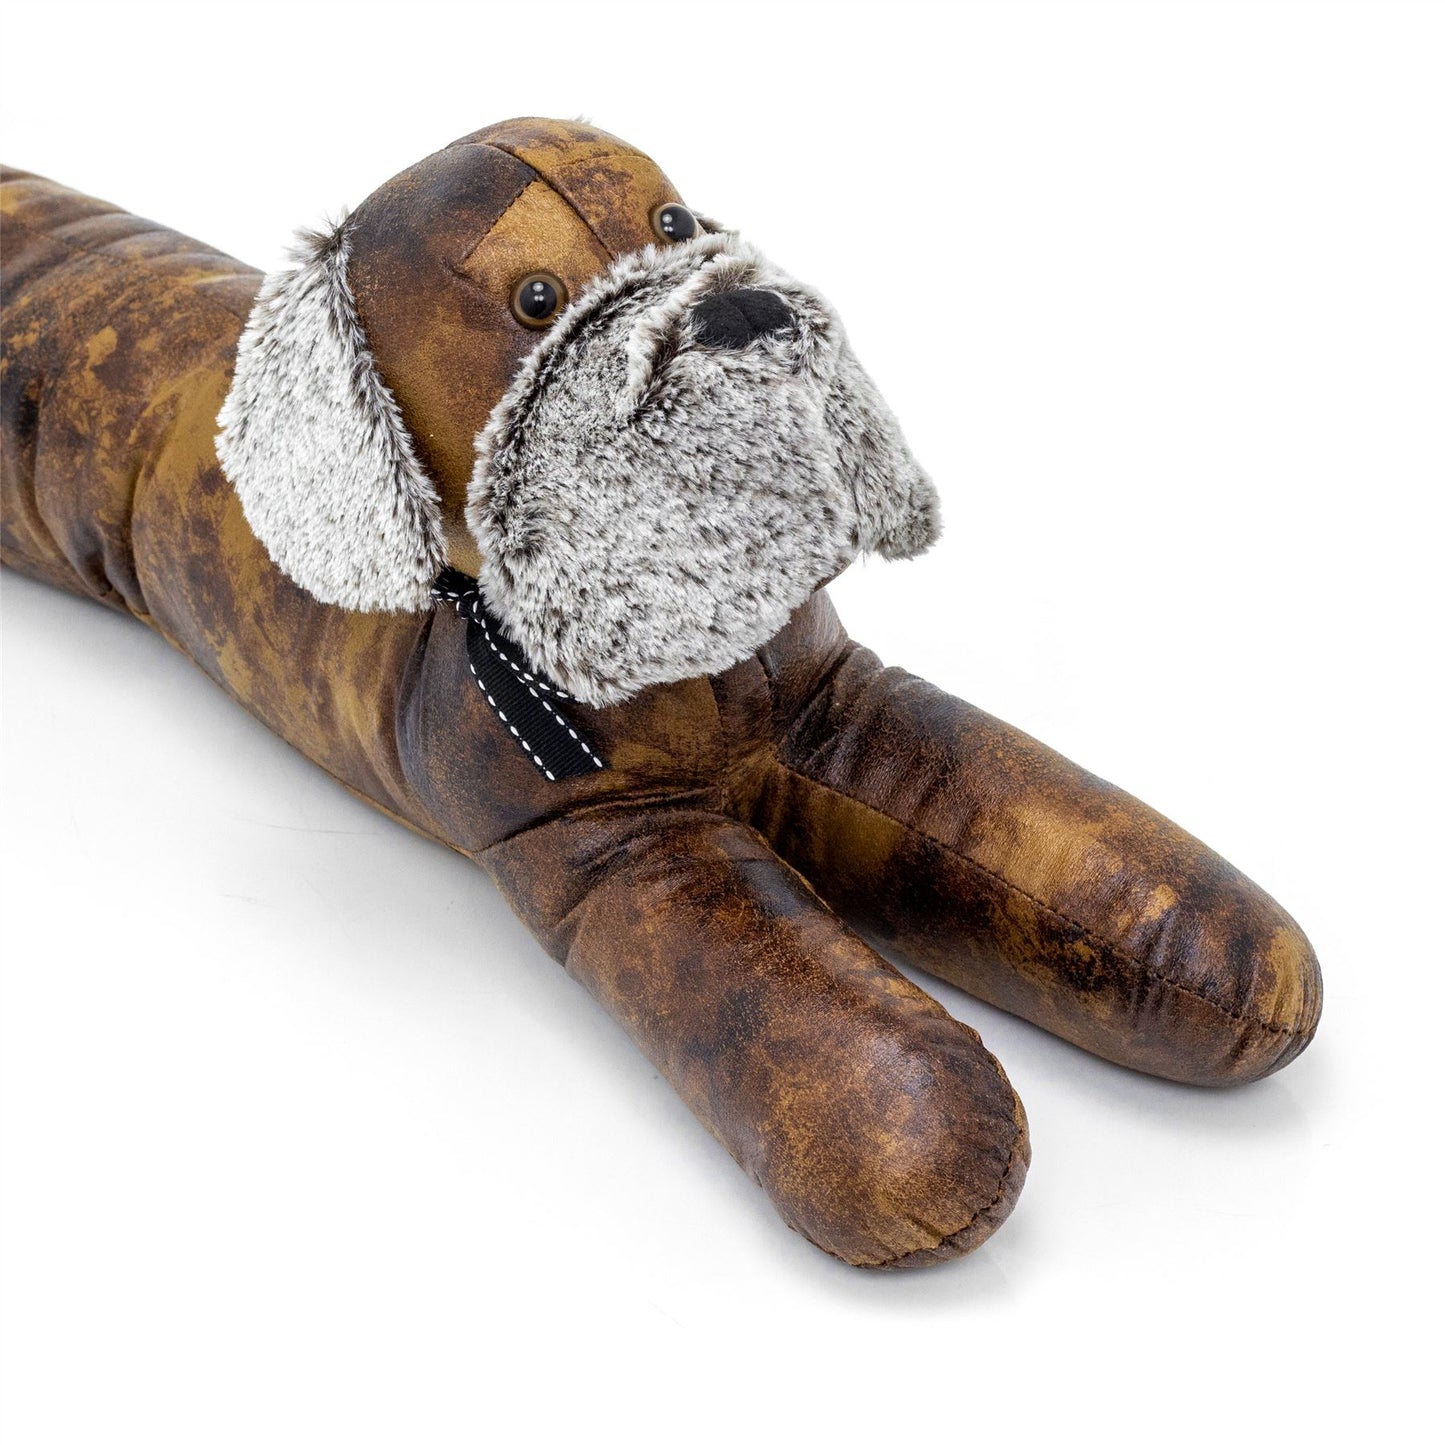 Faux Leather Dog Draught Excluder | Fabric Animal Door Draft Excluder Cushion